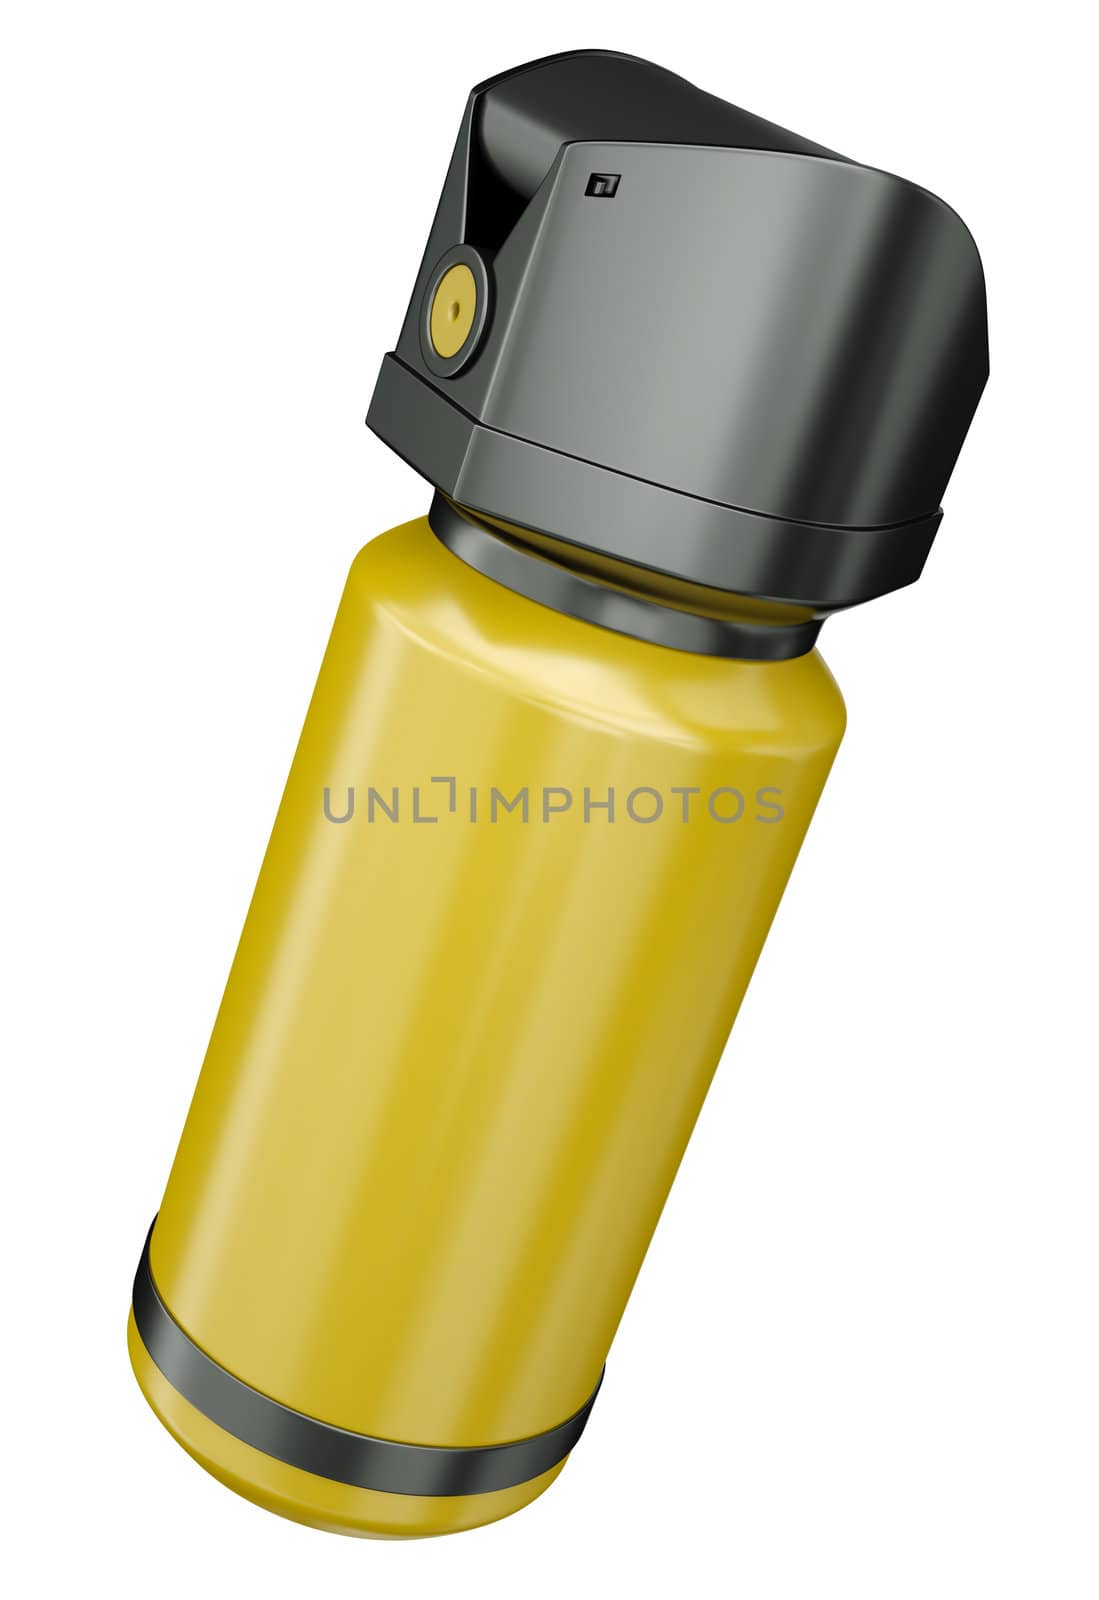 Yellow pepper spray/ tear gas container isolated on a white background. 3D render.